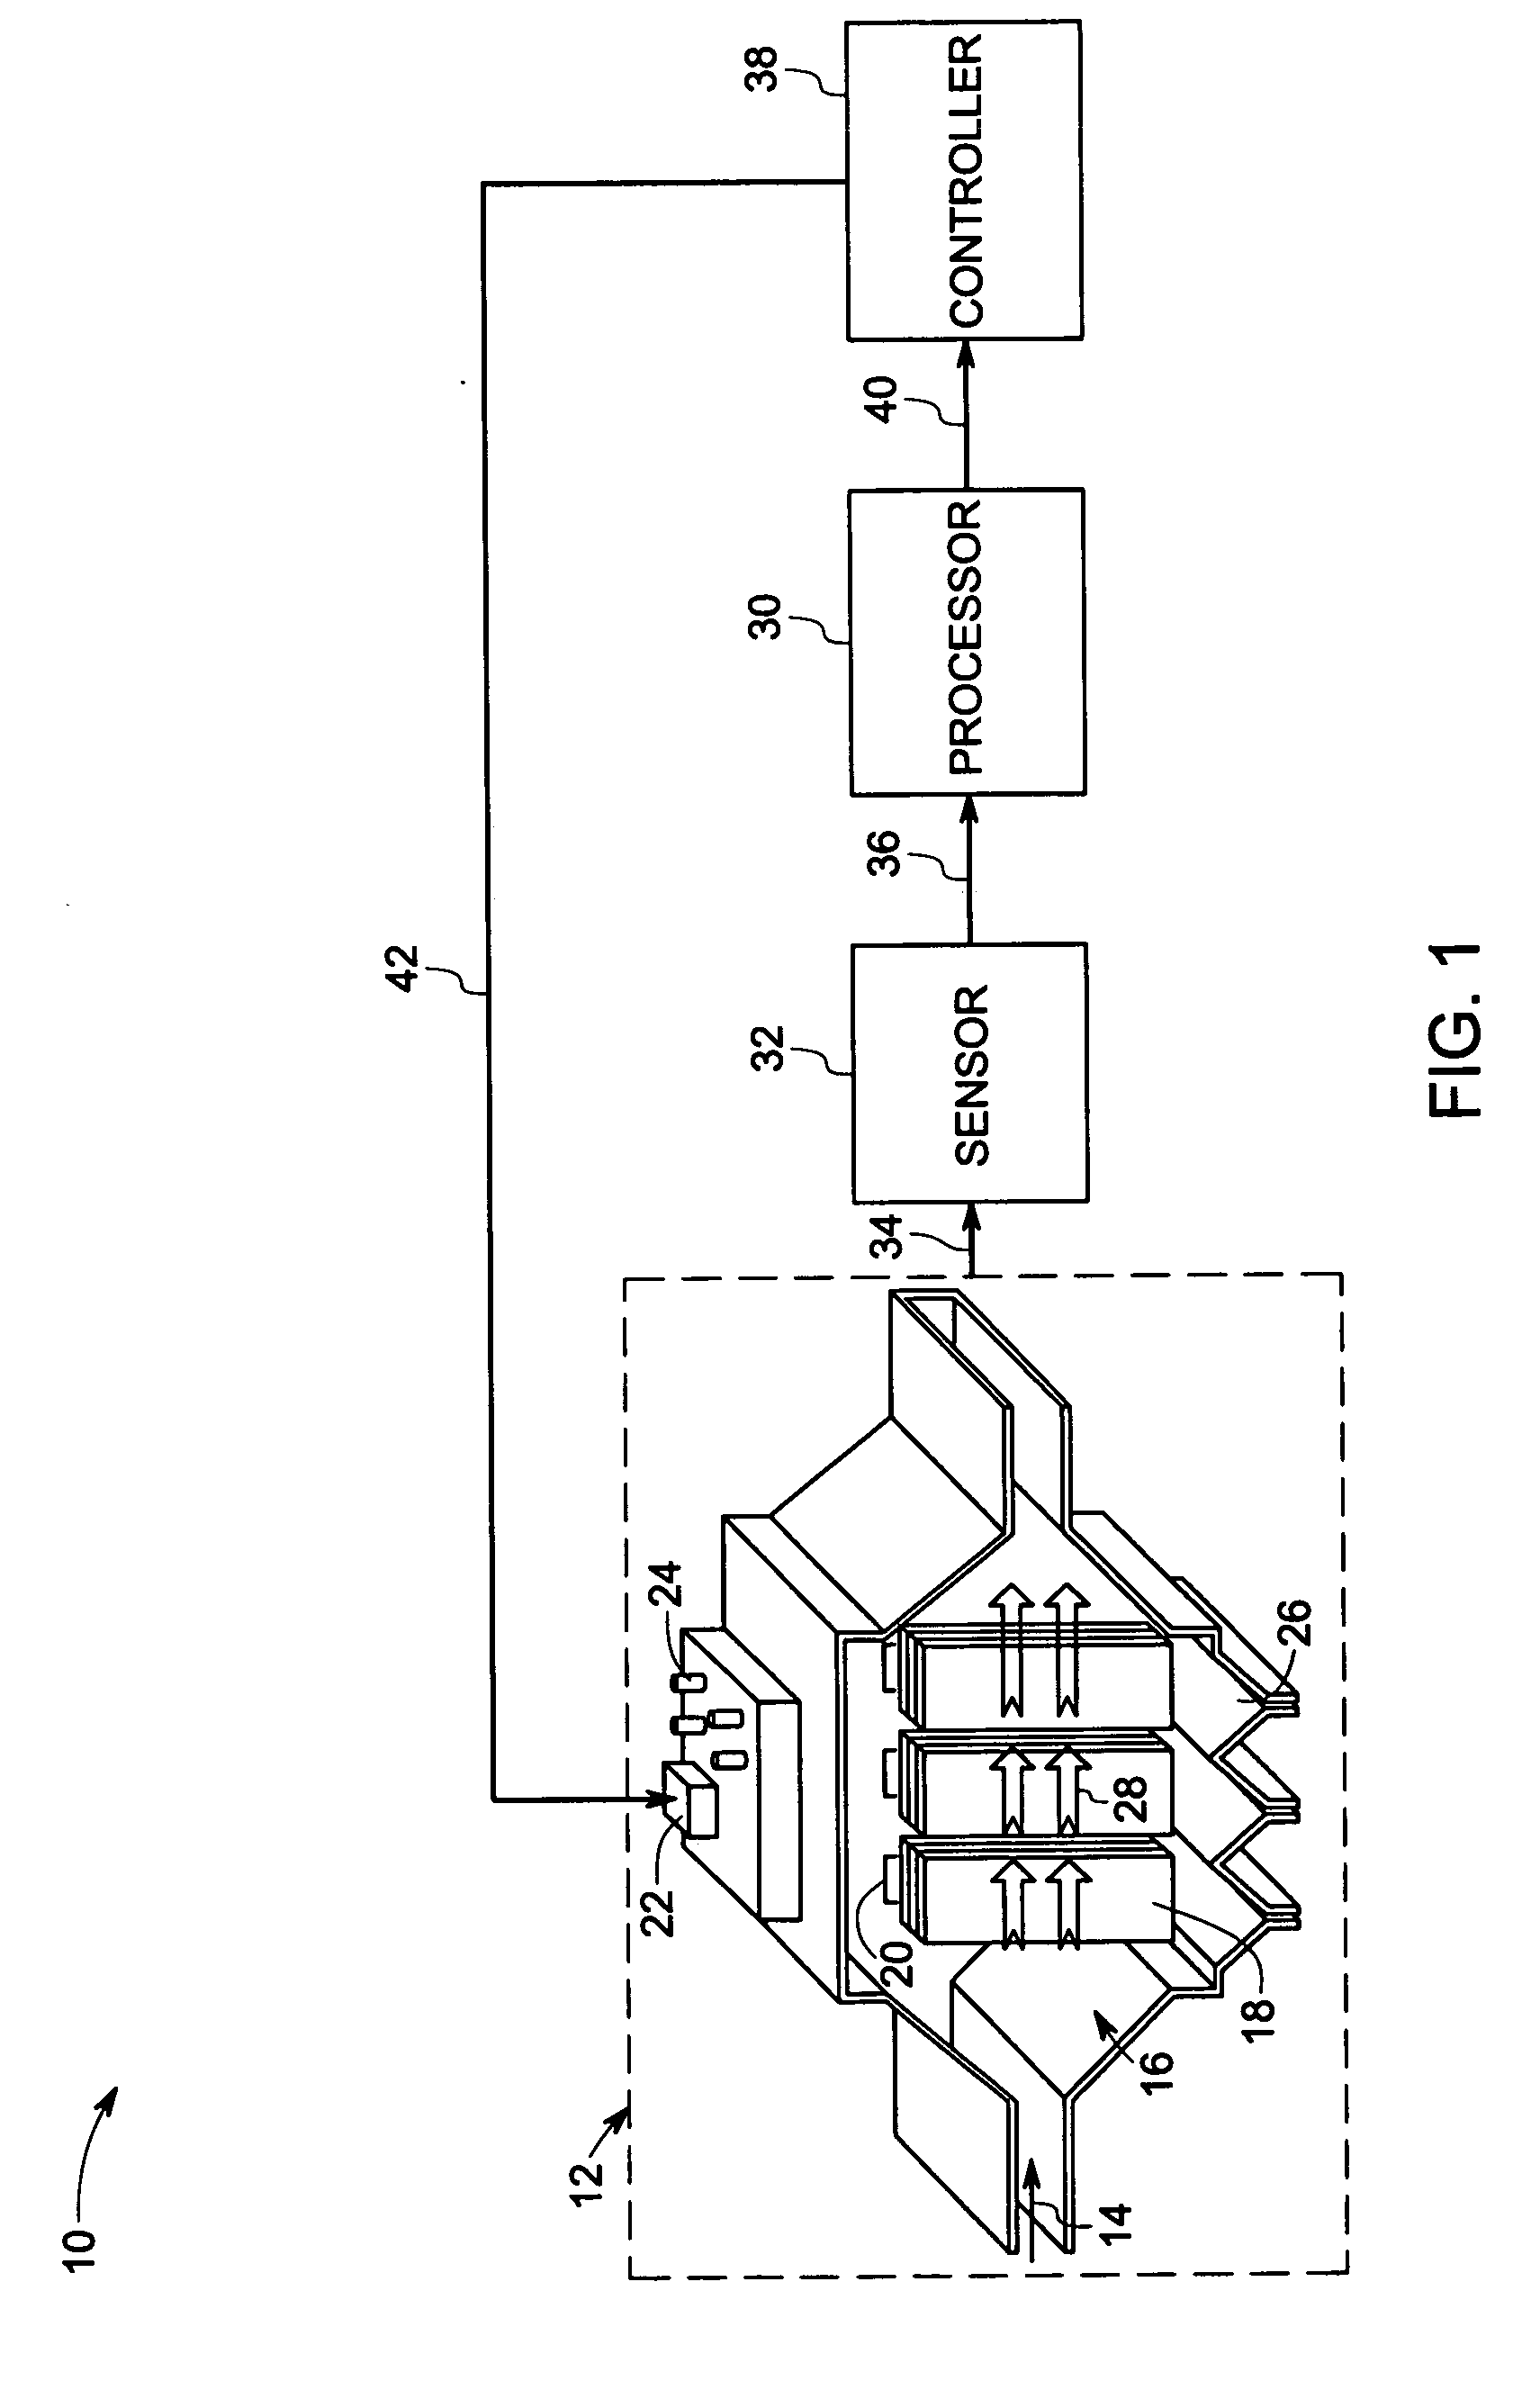 System and method for applying partial discharge analysis for electrostatic precipitator